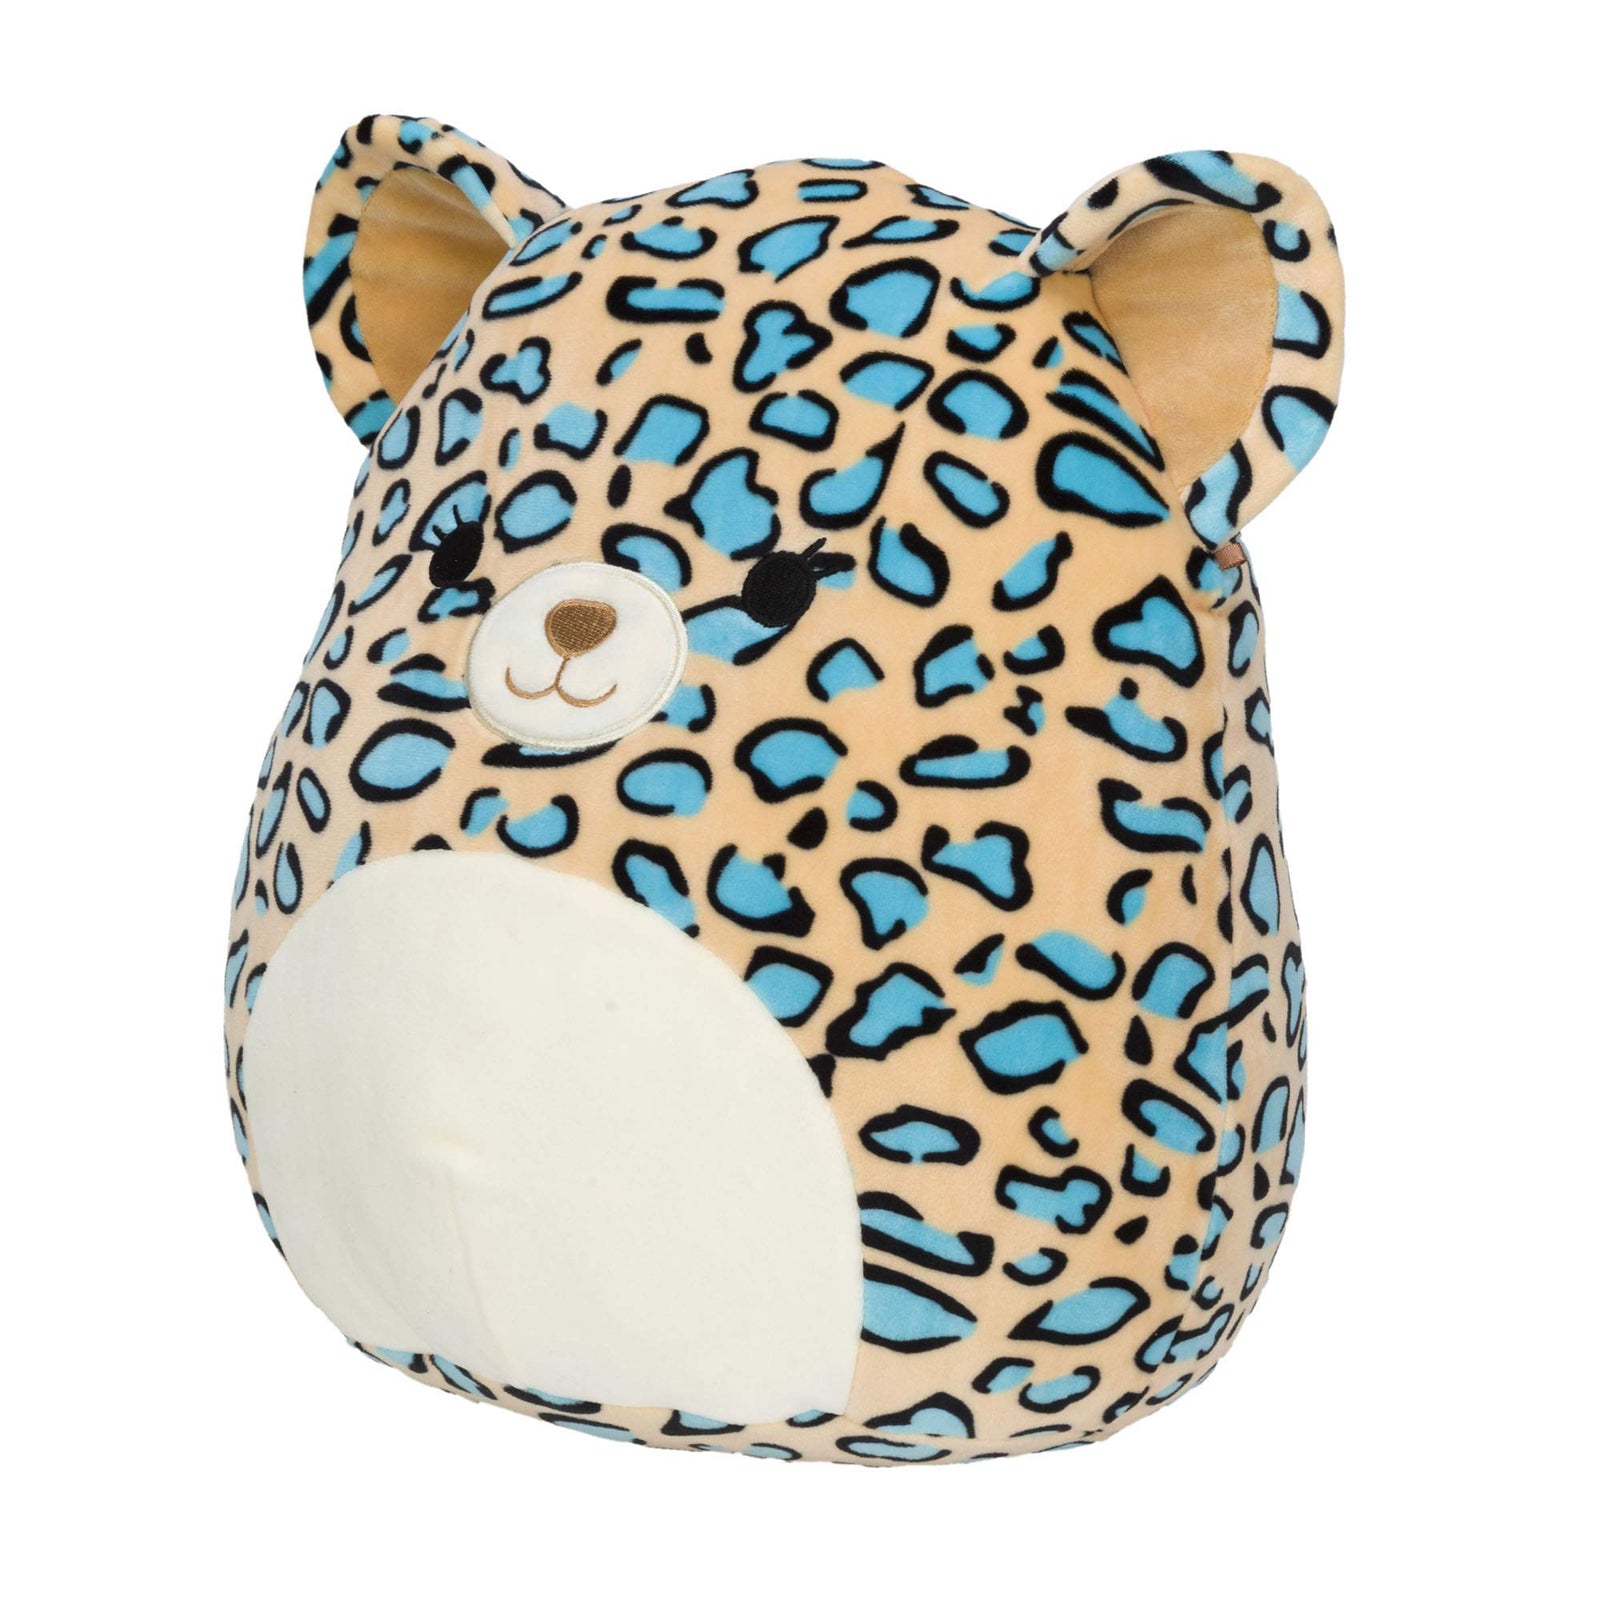 Squishmallow Official Kellytoy Plush 12" Liv The Teal Leopard - Ultrasoft Stuffed Animal Plush Toy